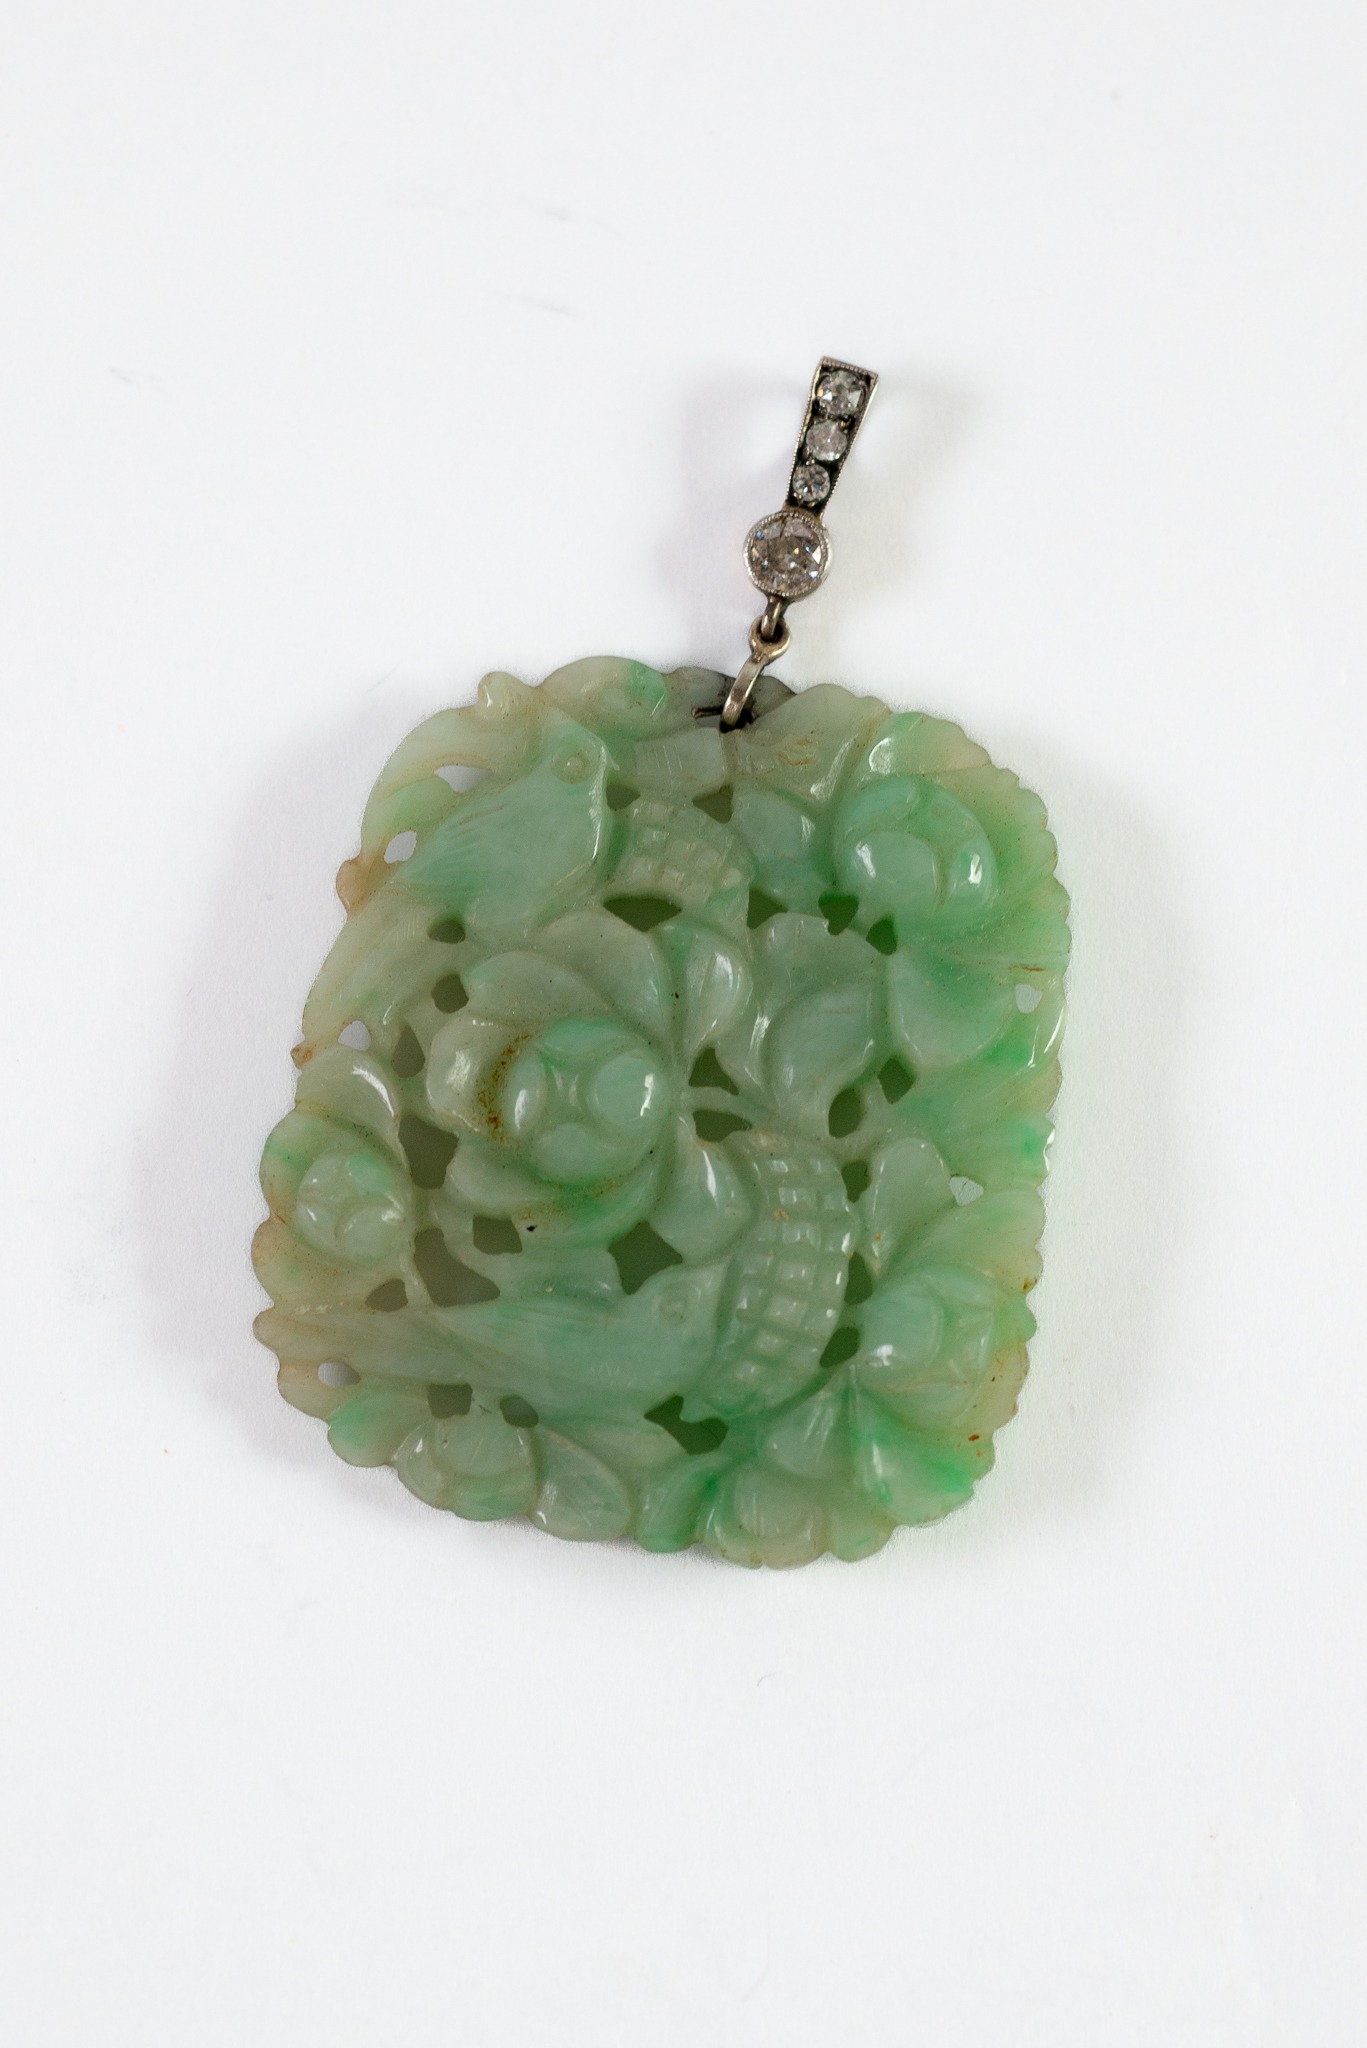 GOOD CHINESE CARVED GREEN JADE PENDANT, PIERCED and on each side with TWO BIRDS EATING FRUIT amongst